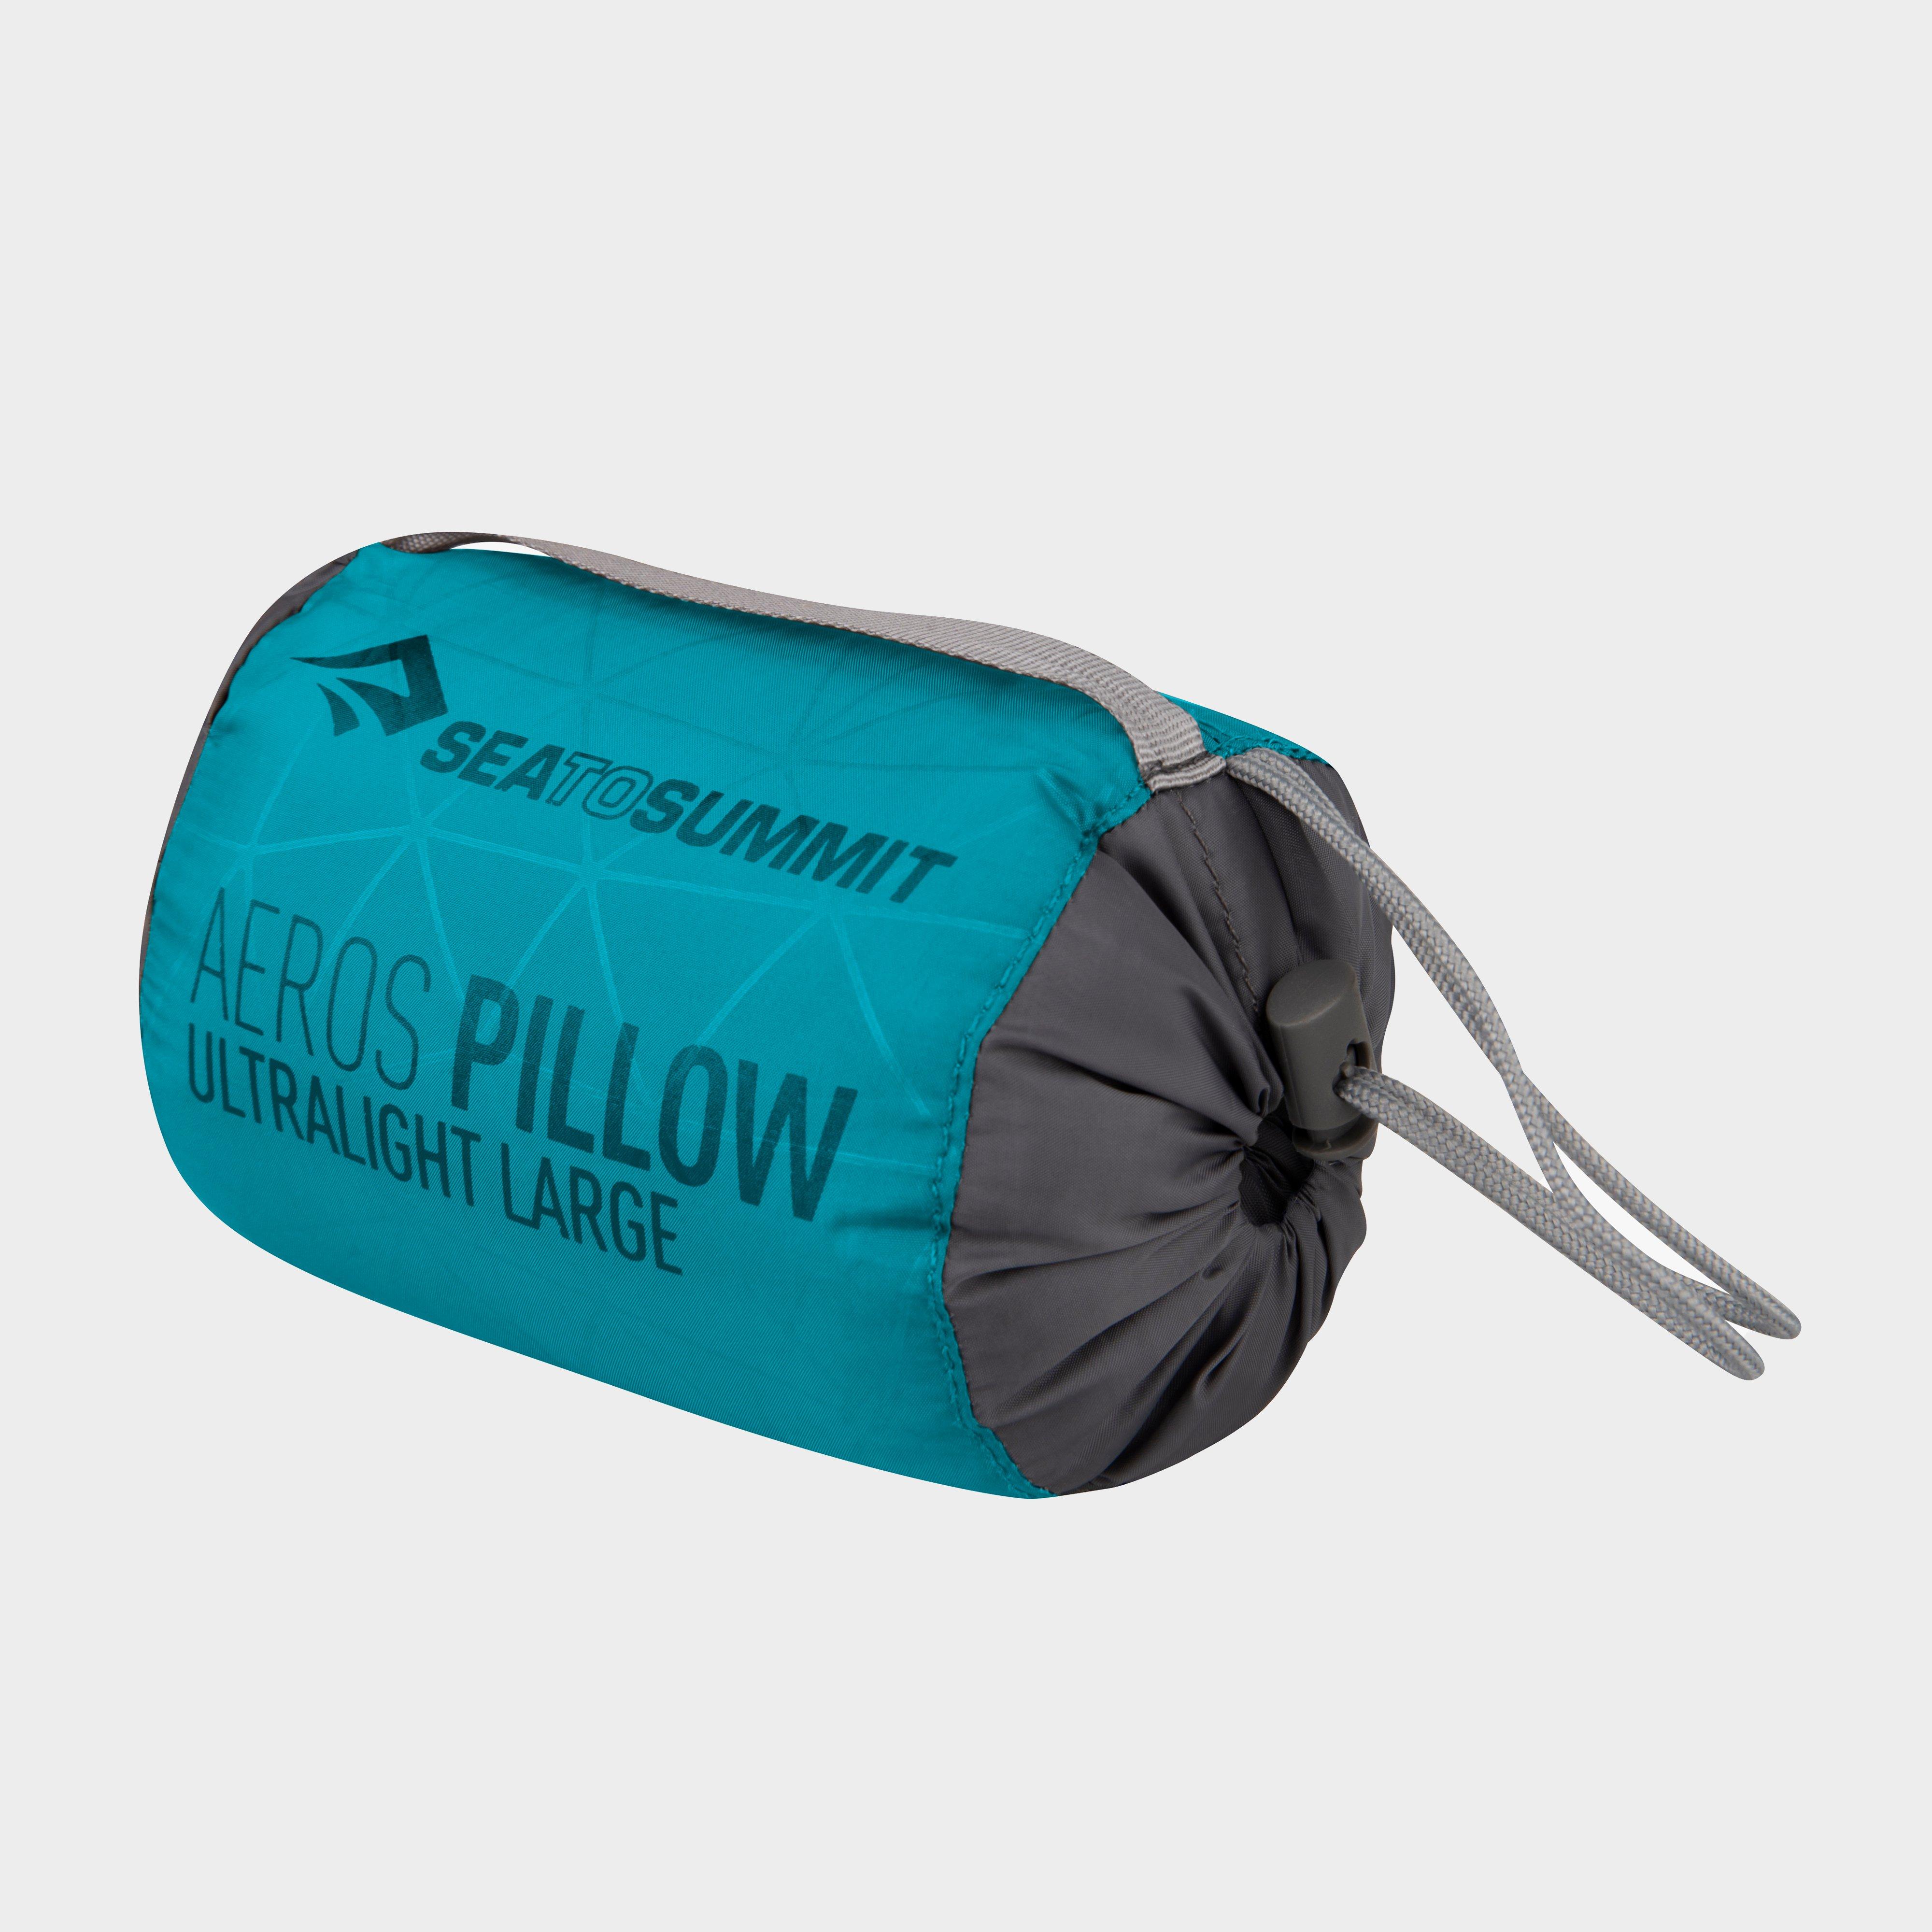 Sea To Summit Aeros Ultralight Pillow (Large) Review